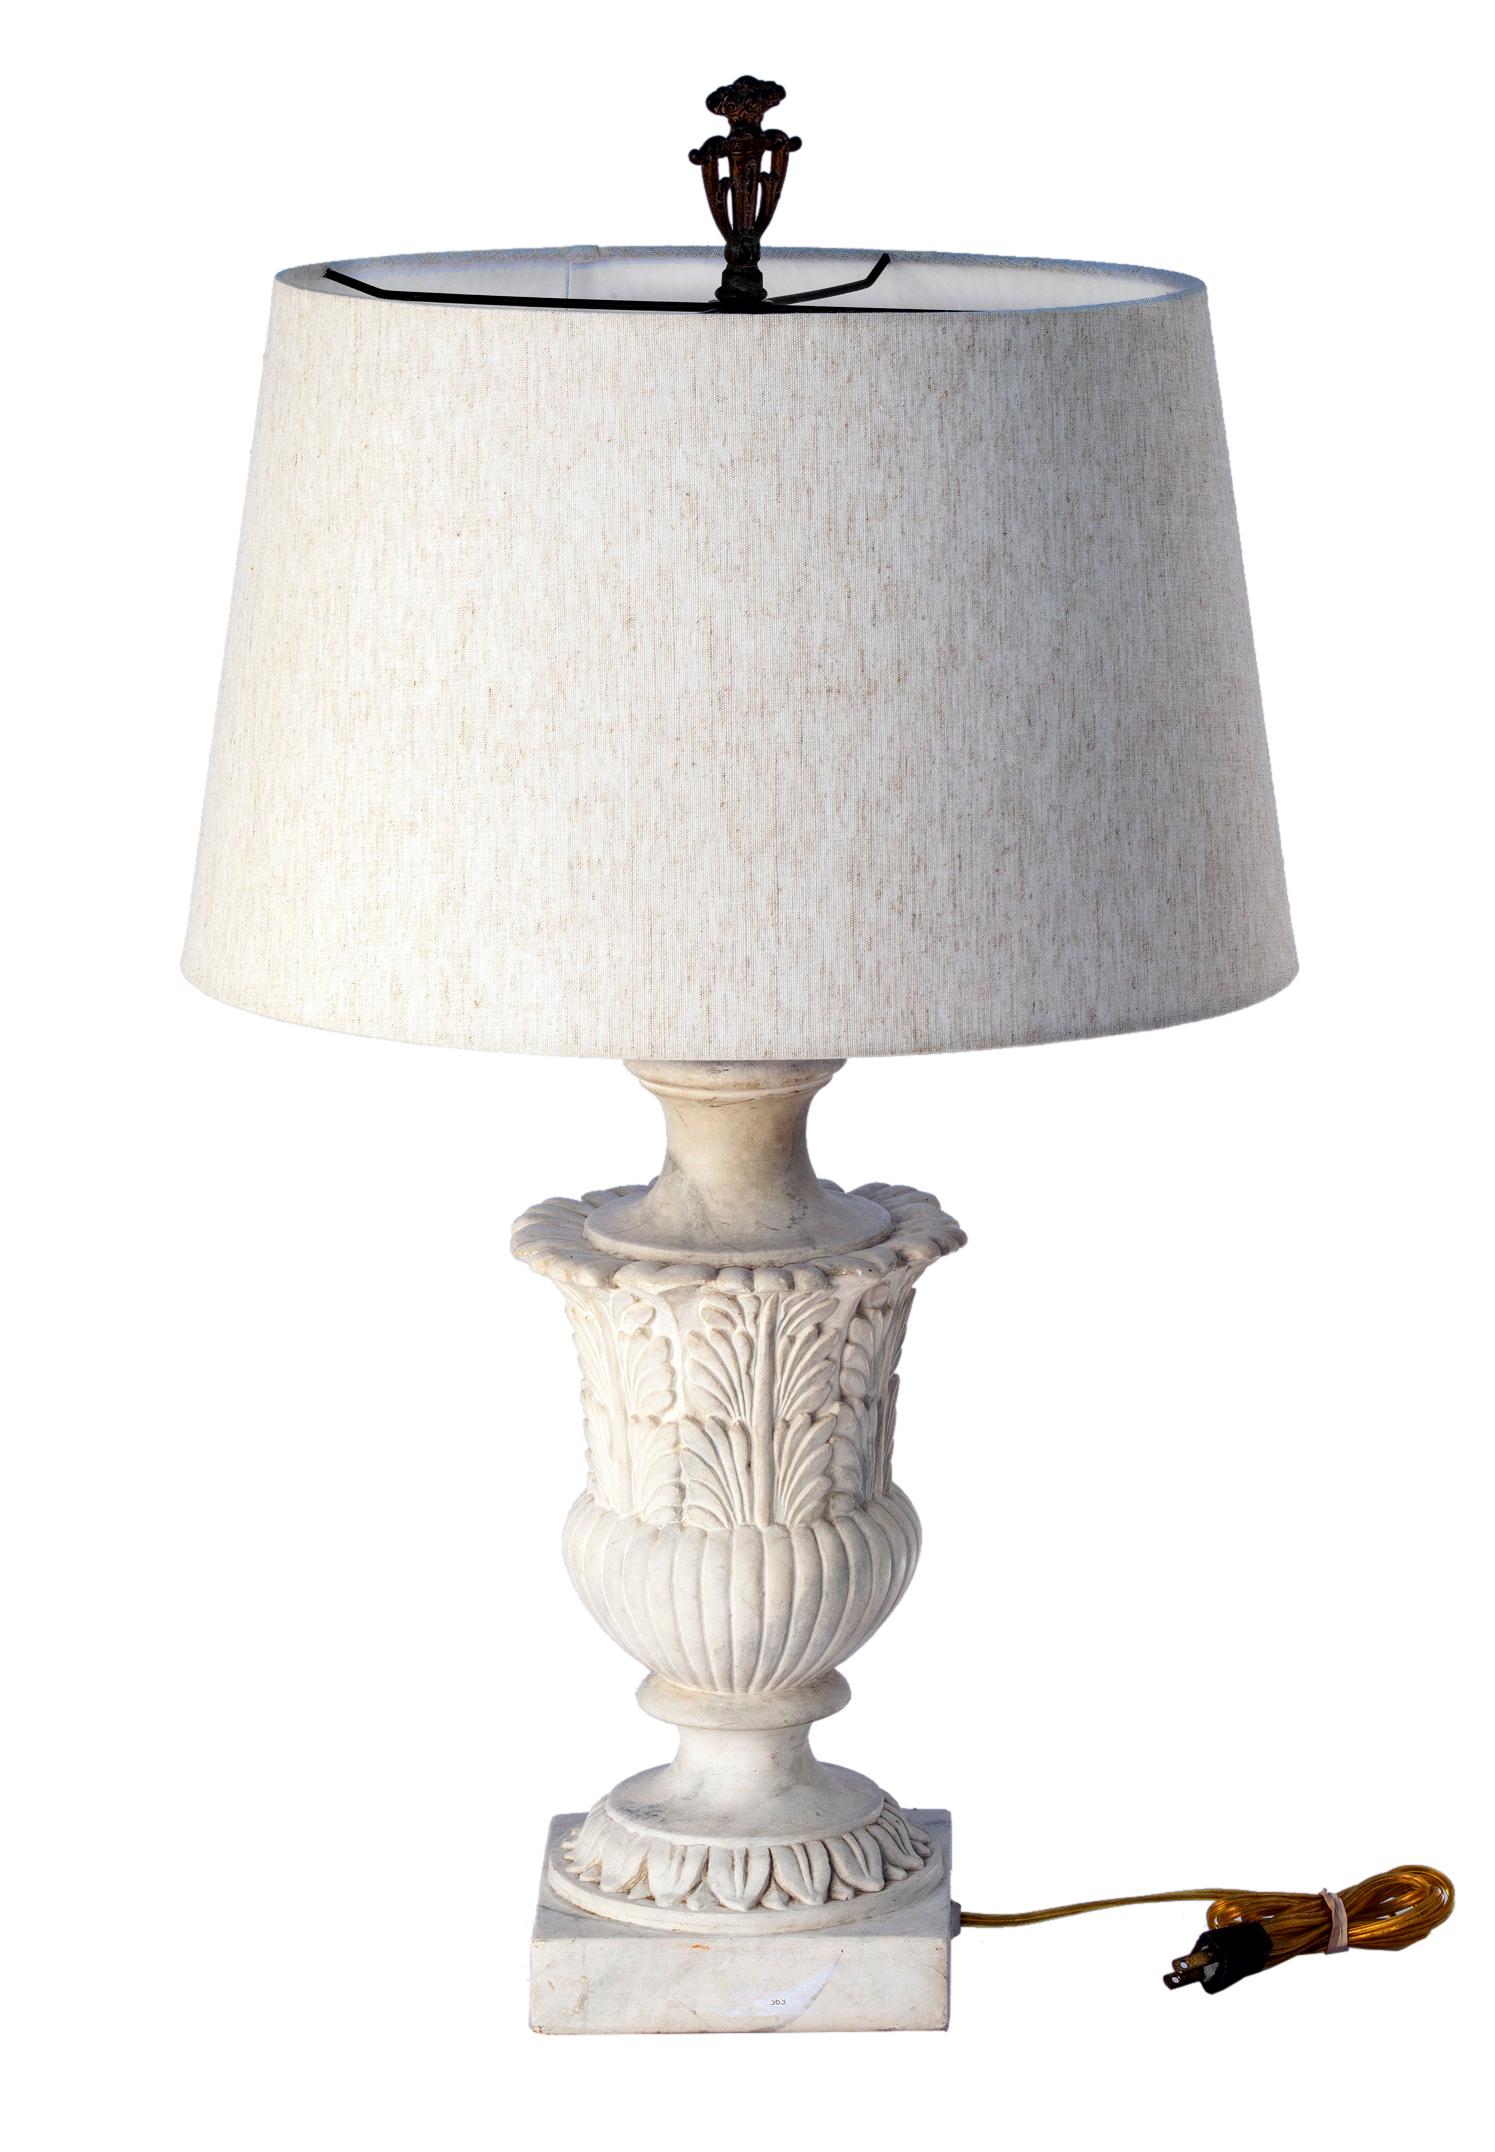 This lamp, in the neoclassical style was created using casting stone material. Ornate & heavy faux marble neoclassical urn. 
The base has an intricate leaf pattern, with a fluted body which sits atop the square base which has classical repeat